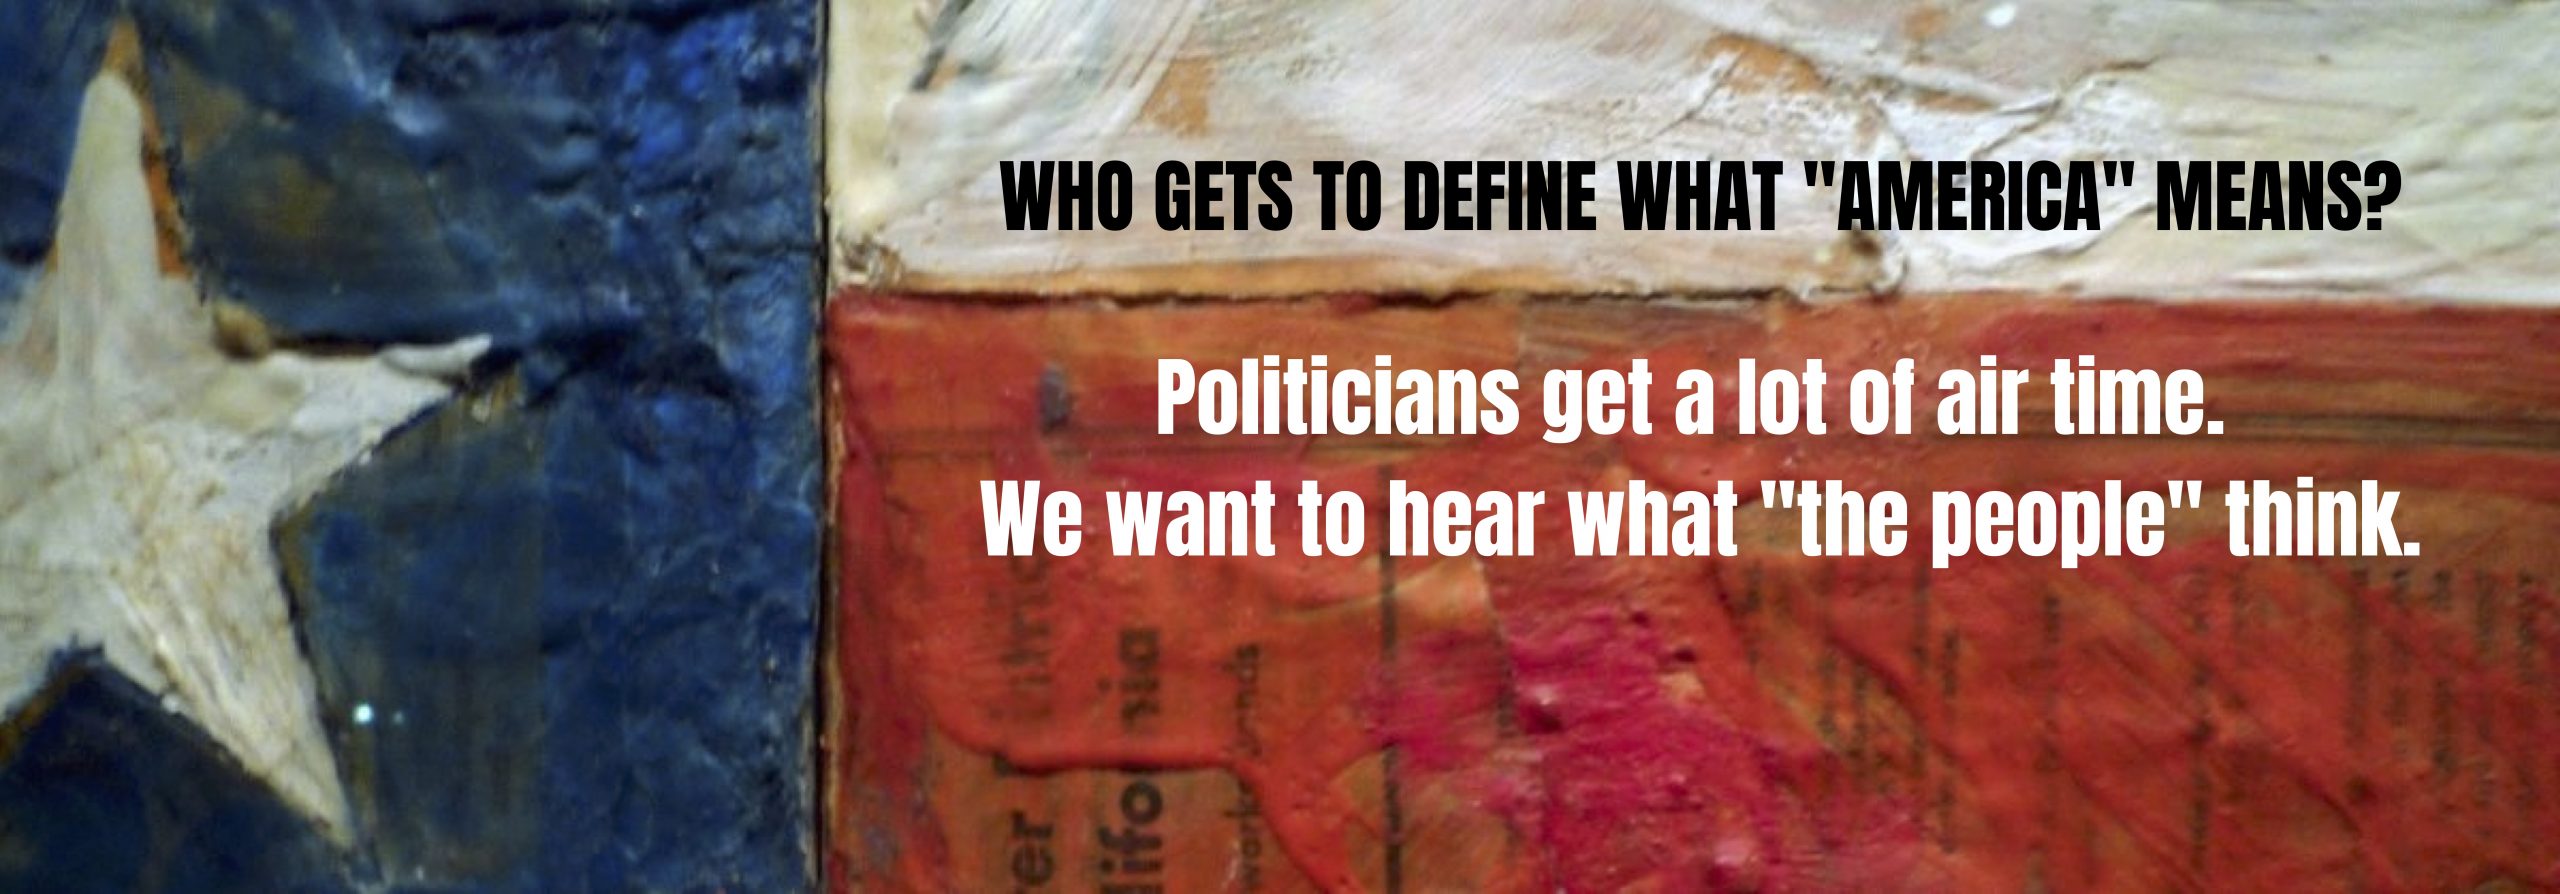 Who gets to define what "America" means? Politicians get a lot of air time. We want to hear what "the people" think.